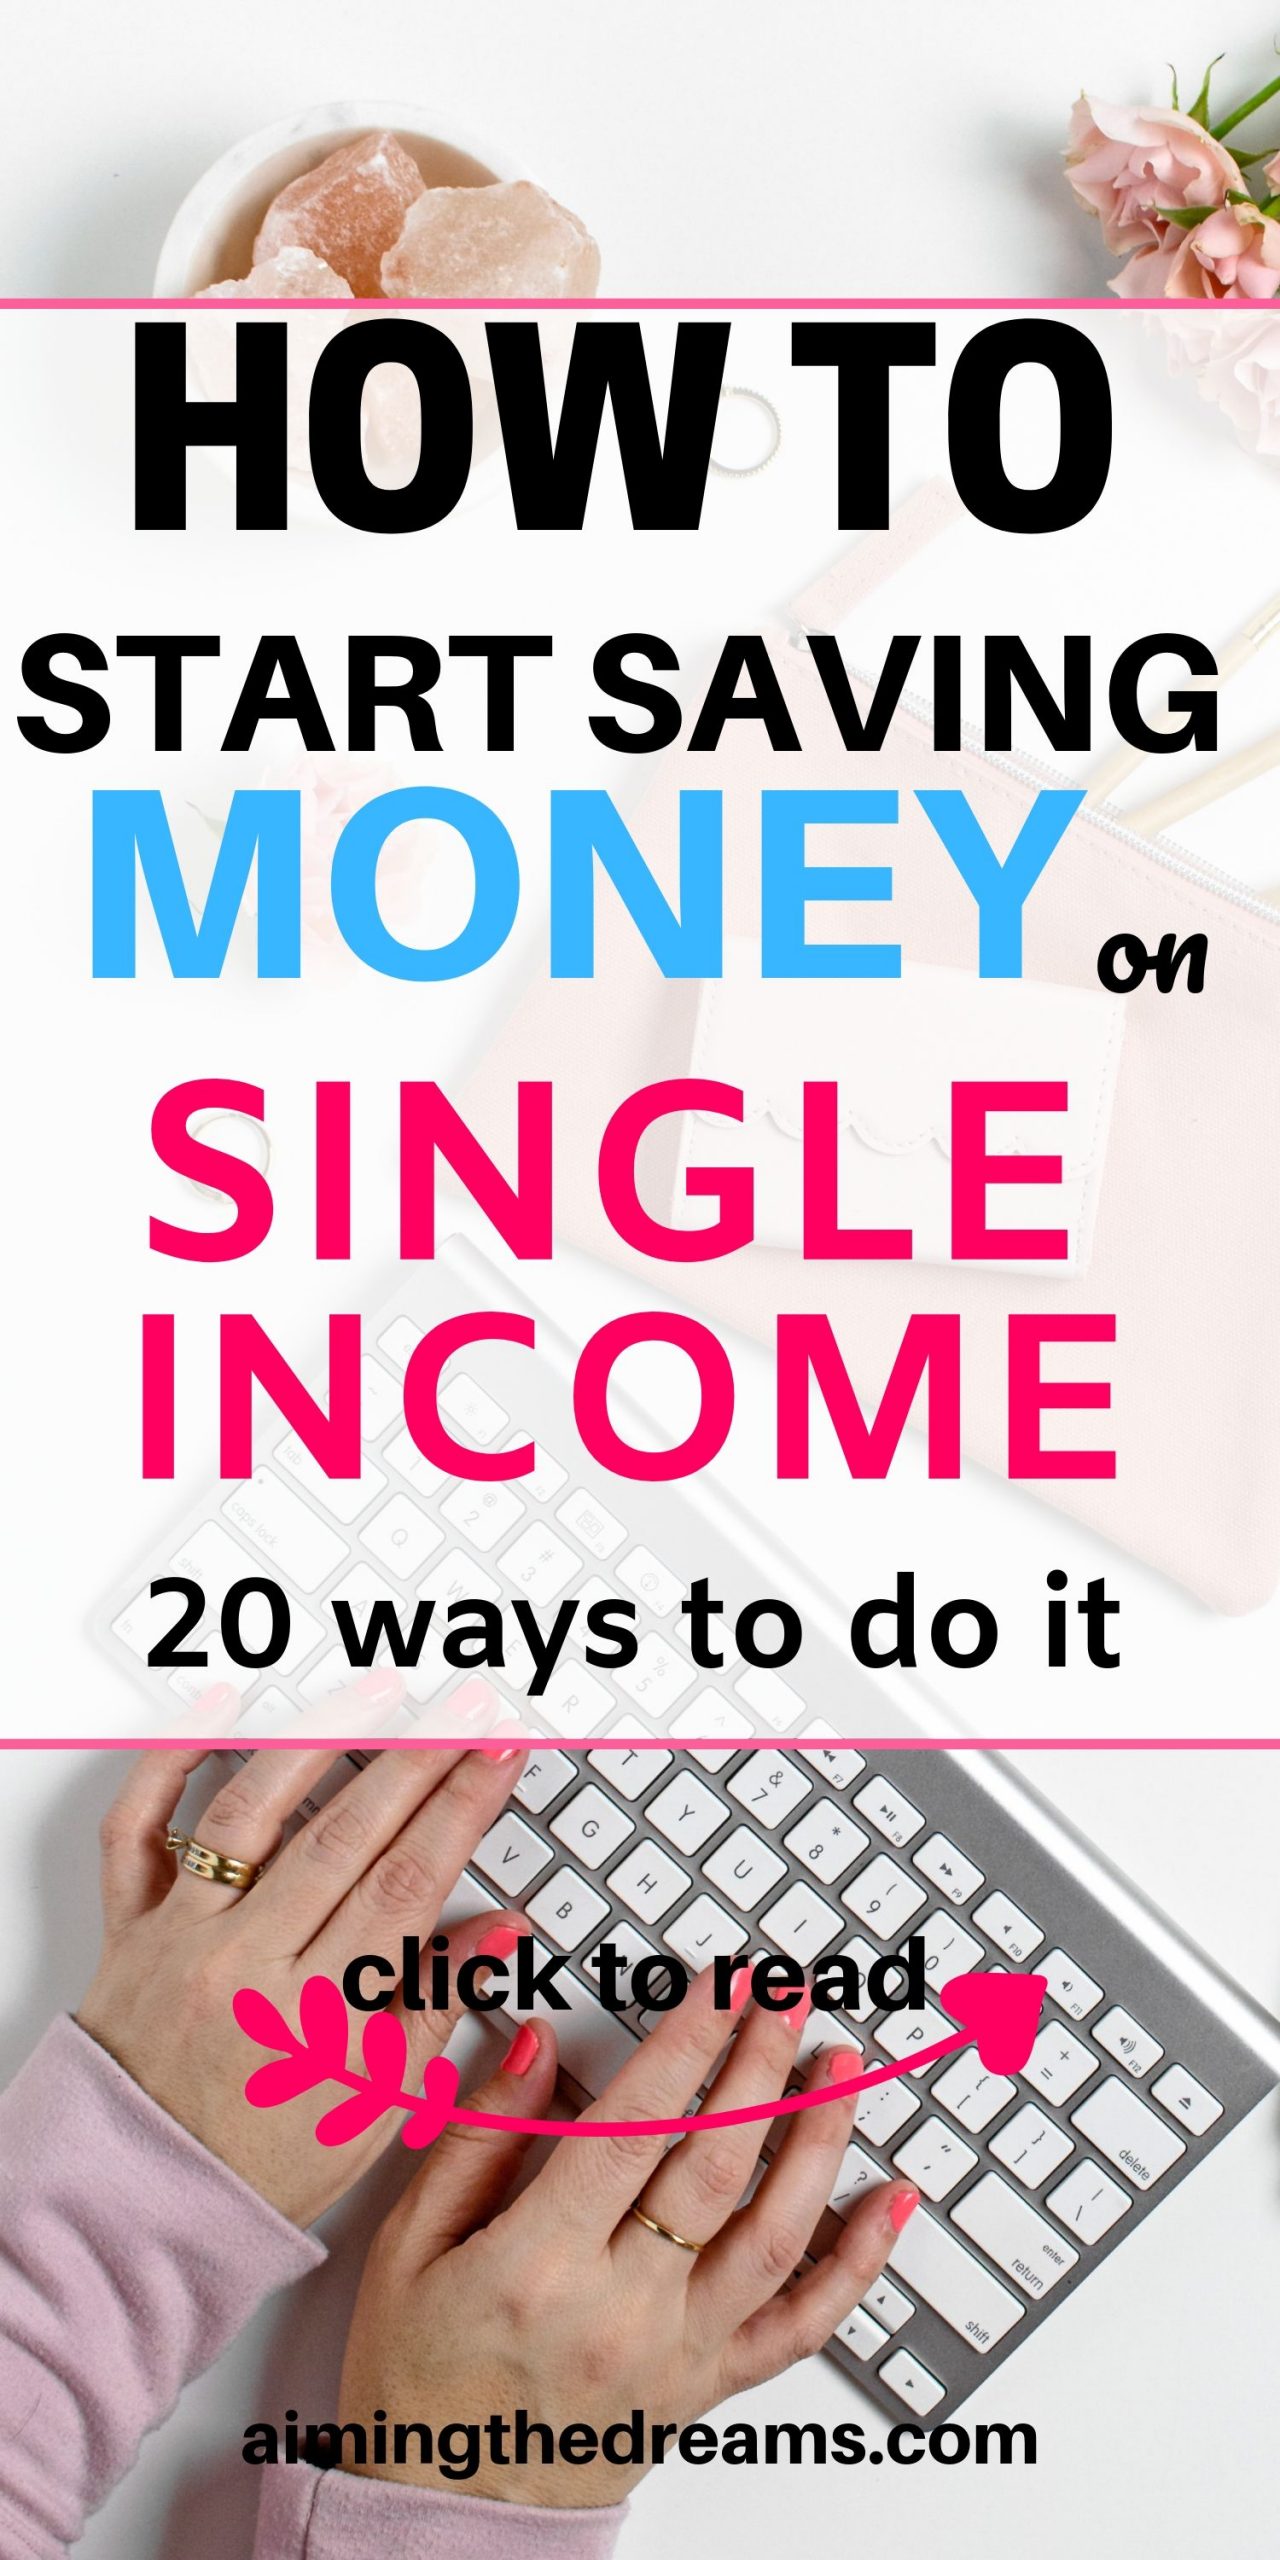 How to start saving money on single income. Start budgeting, sidehustles and make money as extra income if you want to save money.